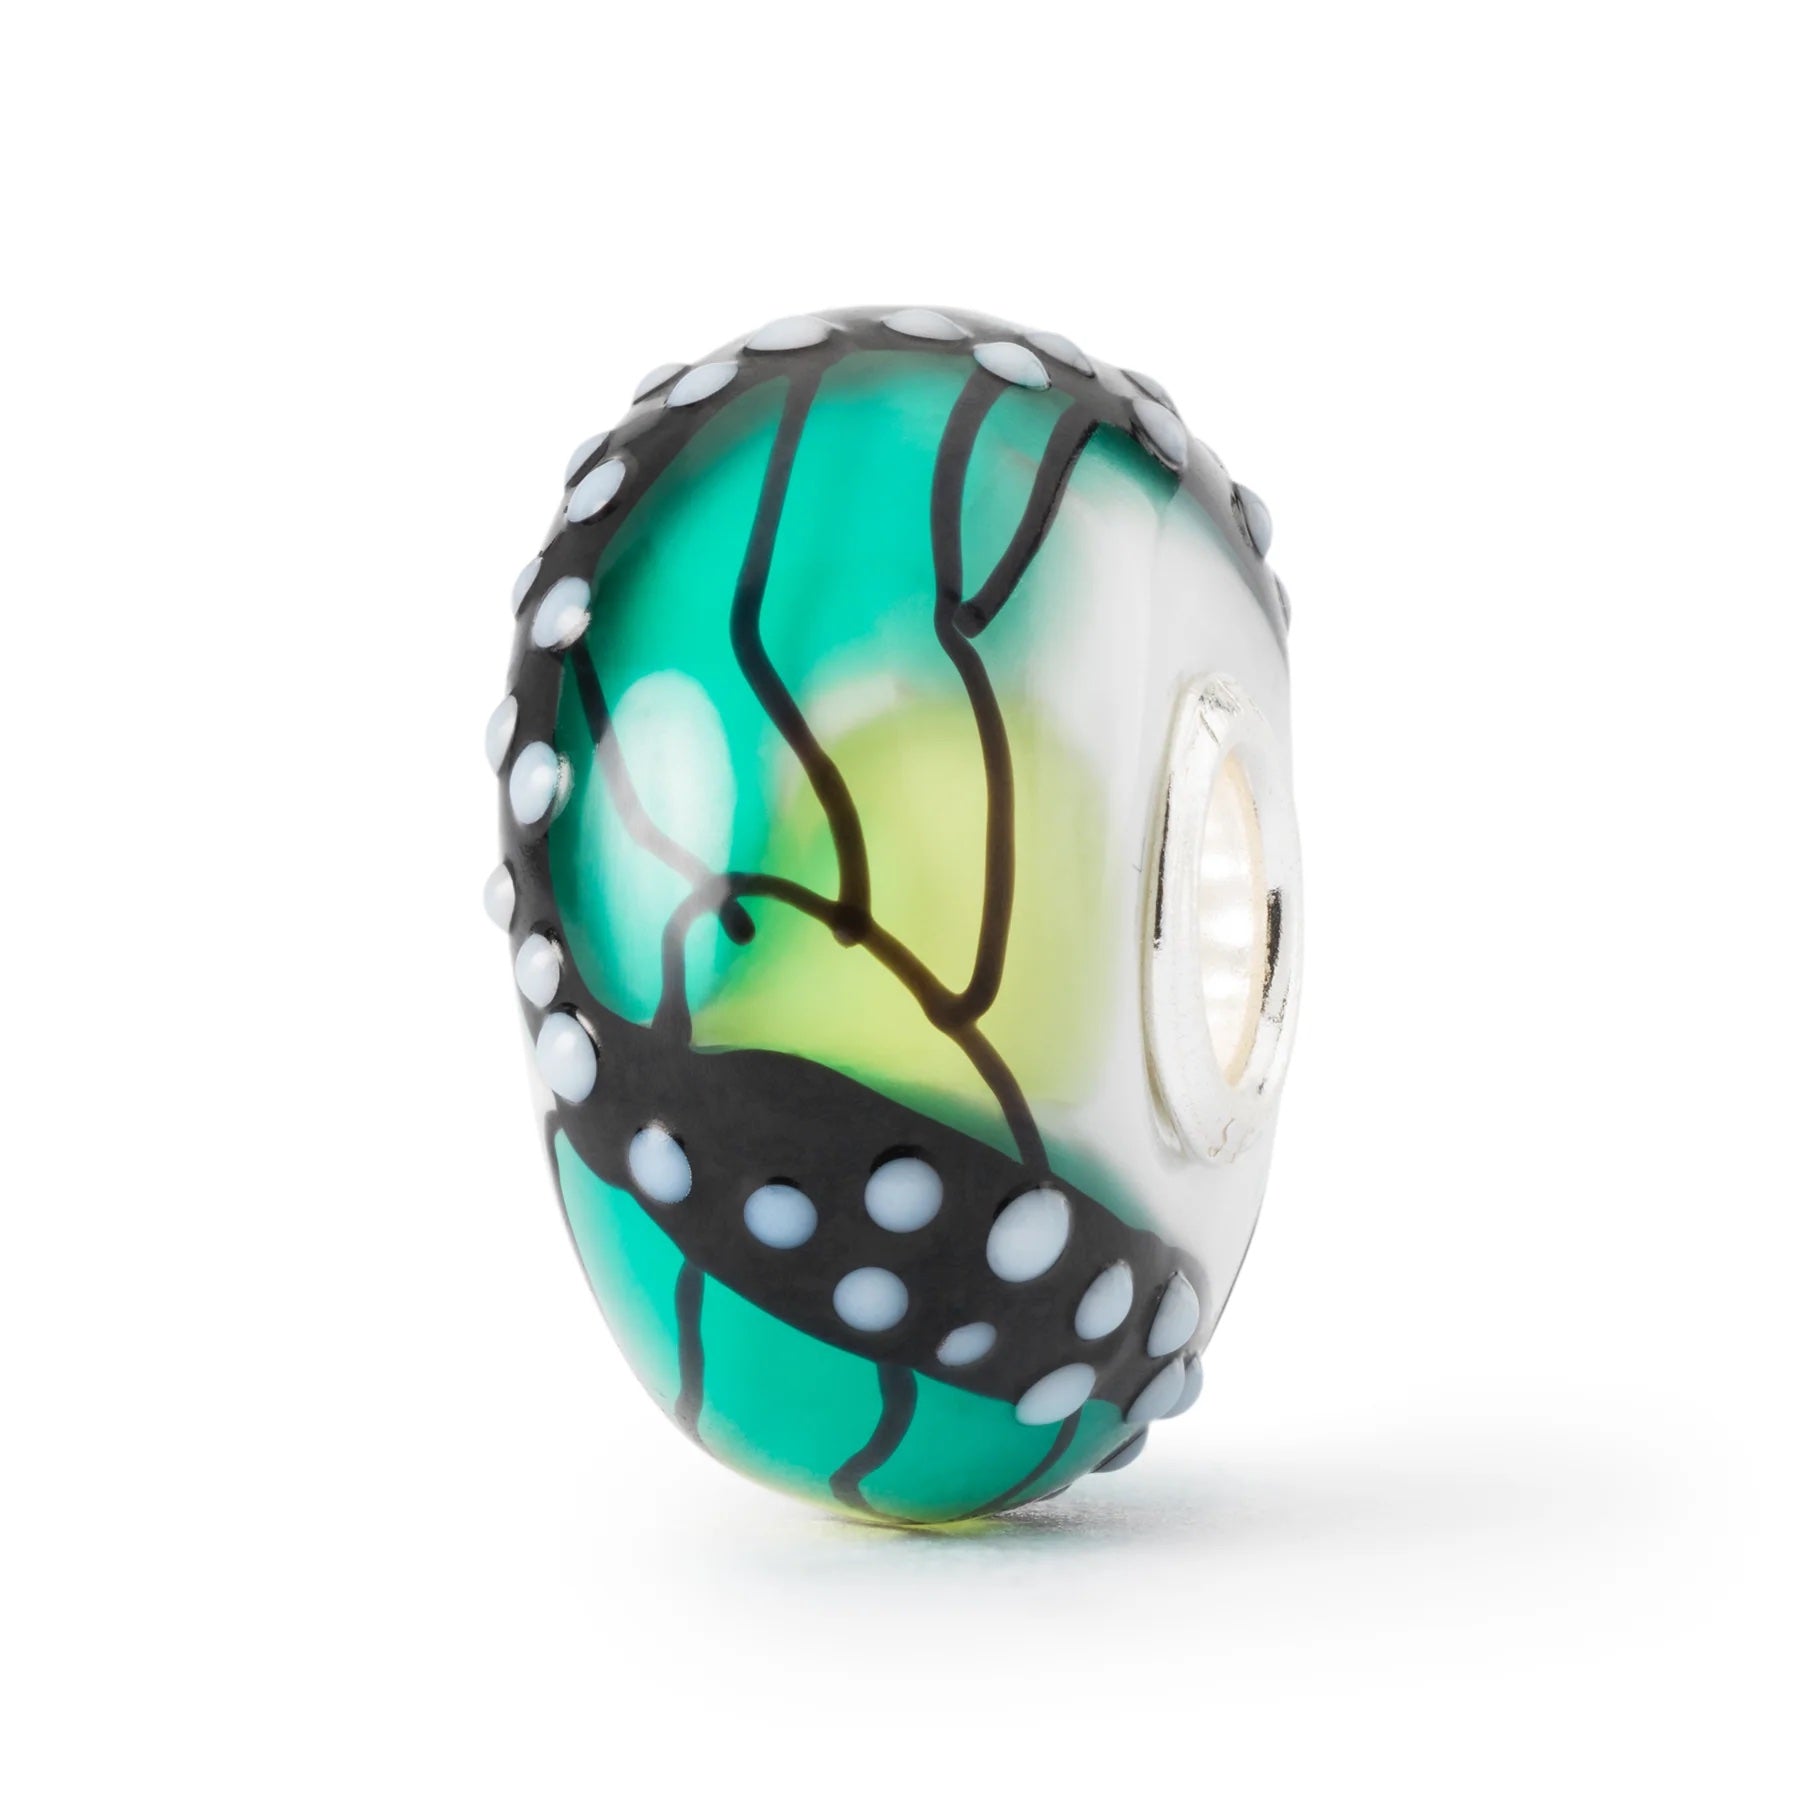 Trollbeads Wings of Success Limited Edition Glass Bead